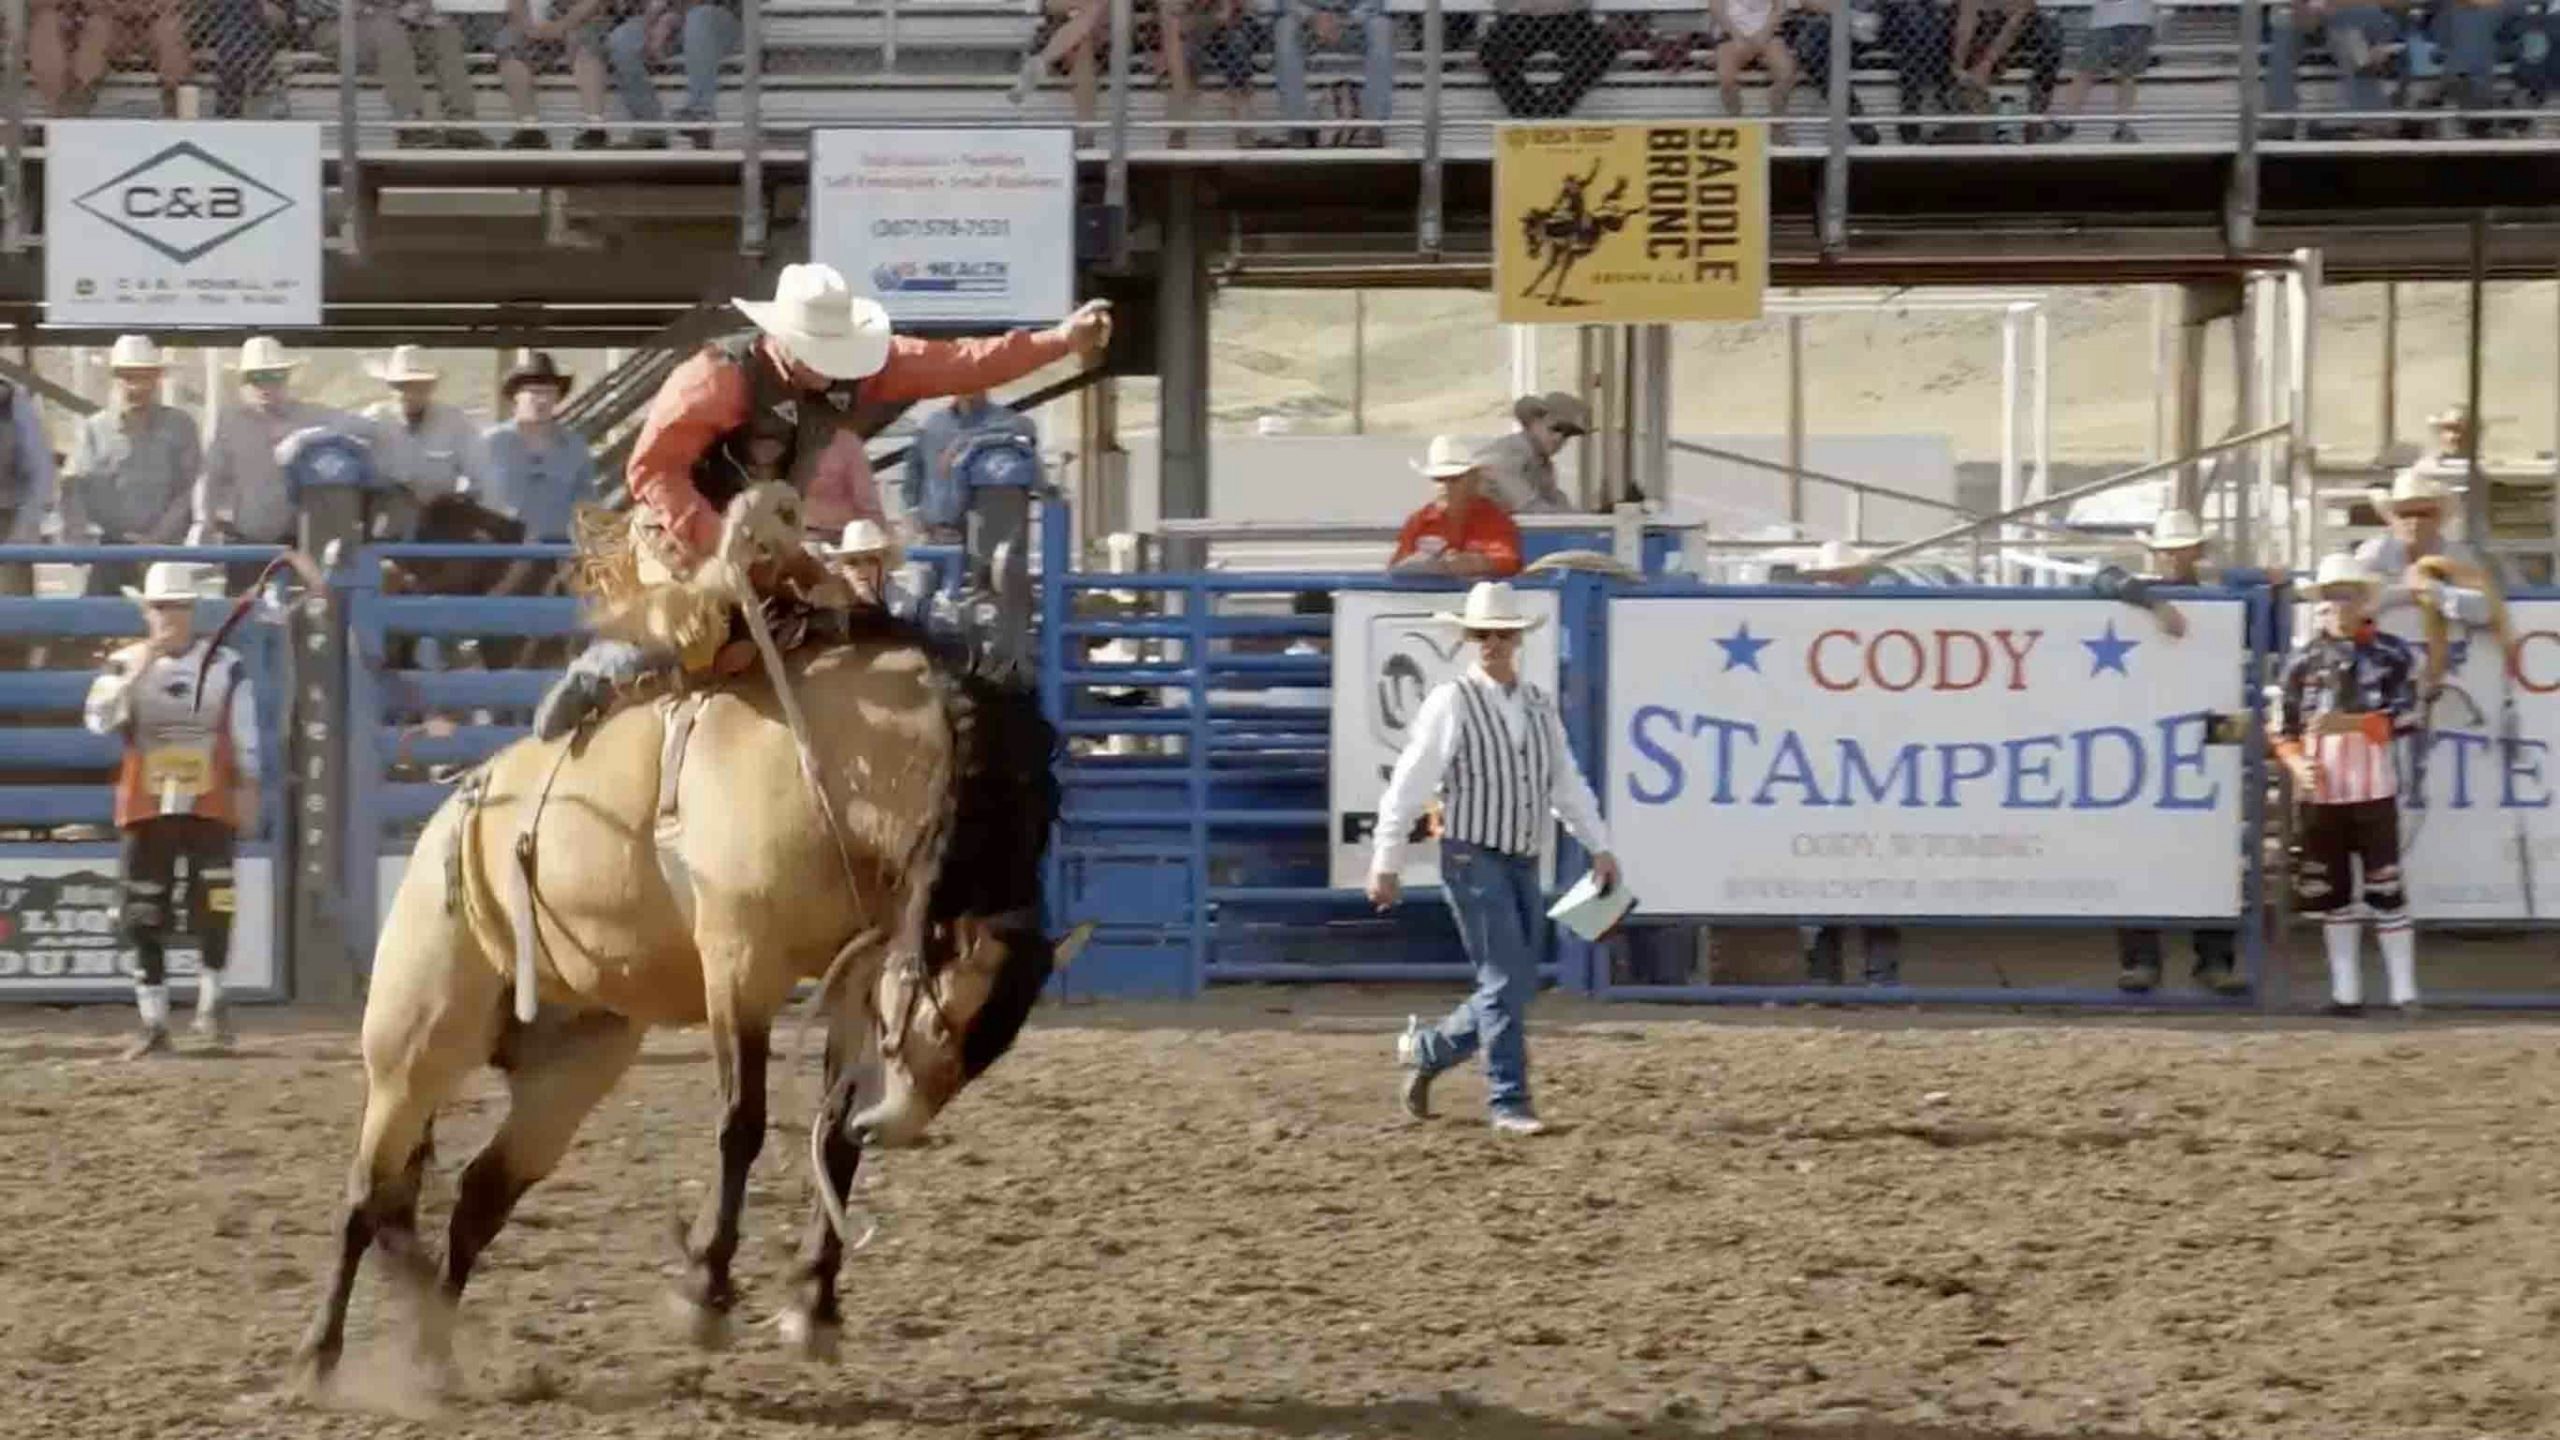 Cody stampede 6 17 20 scaled